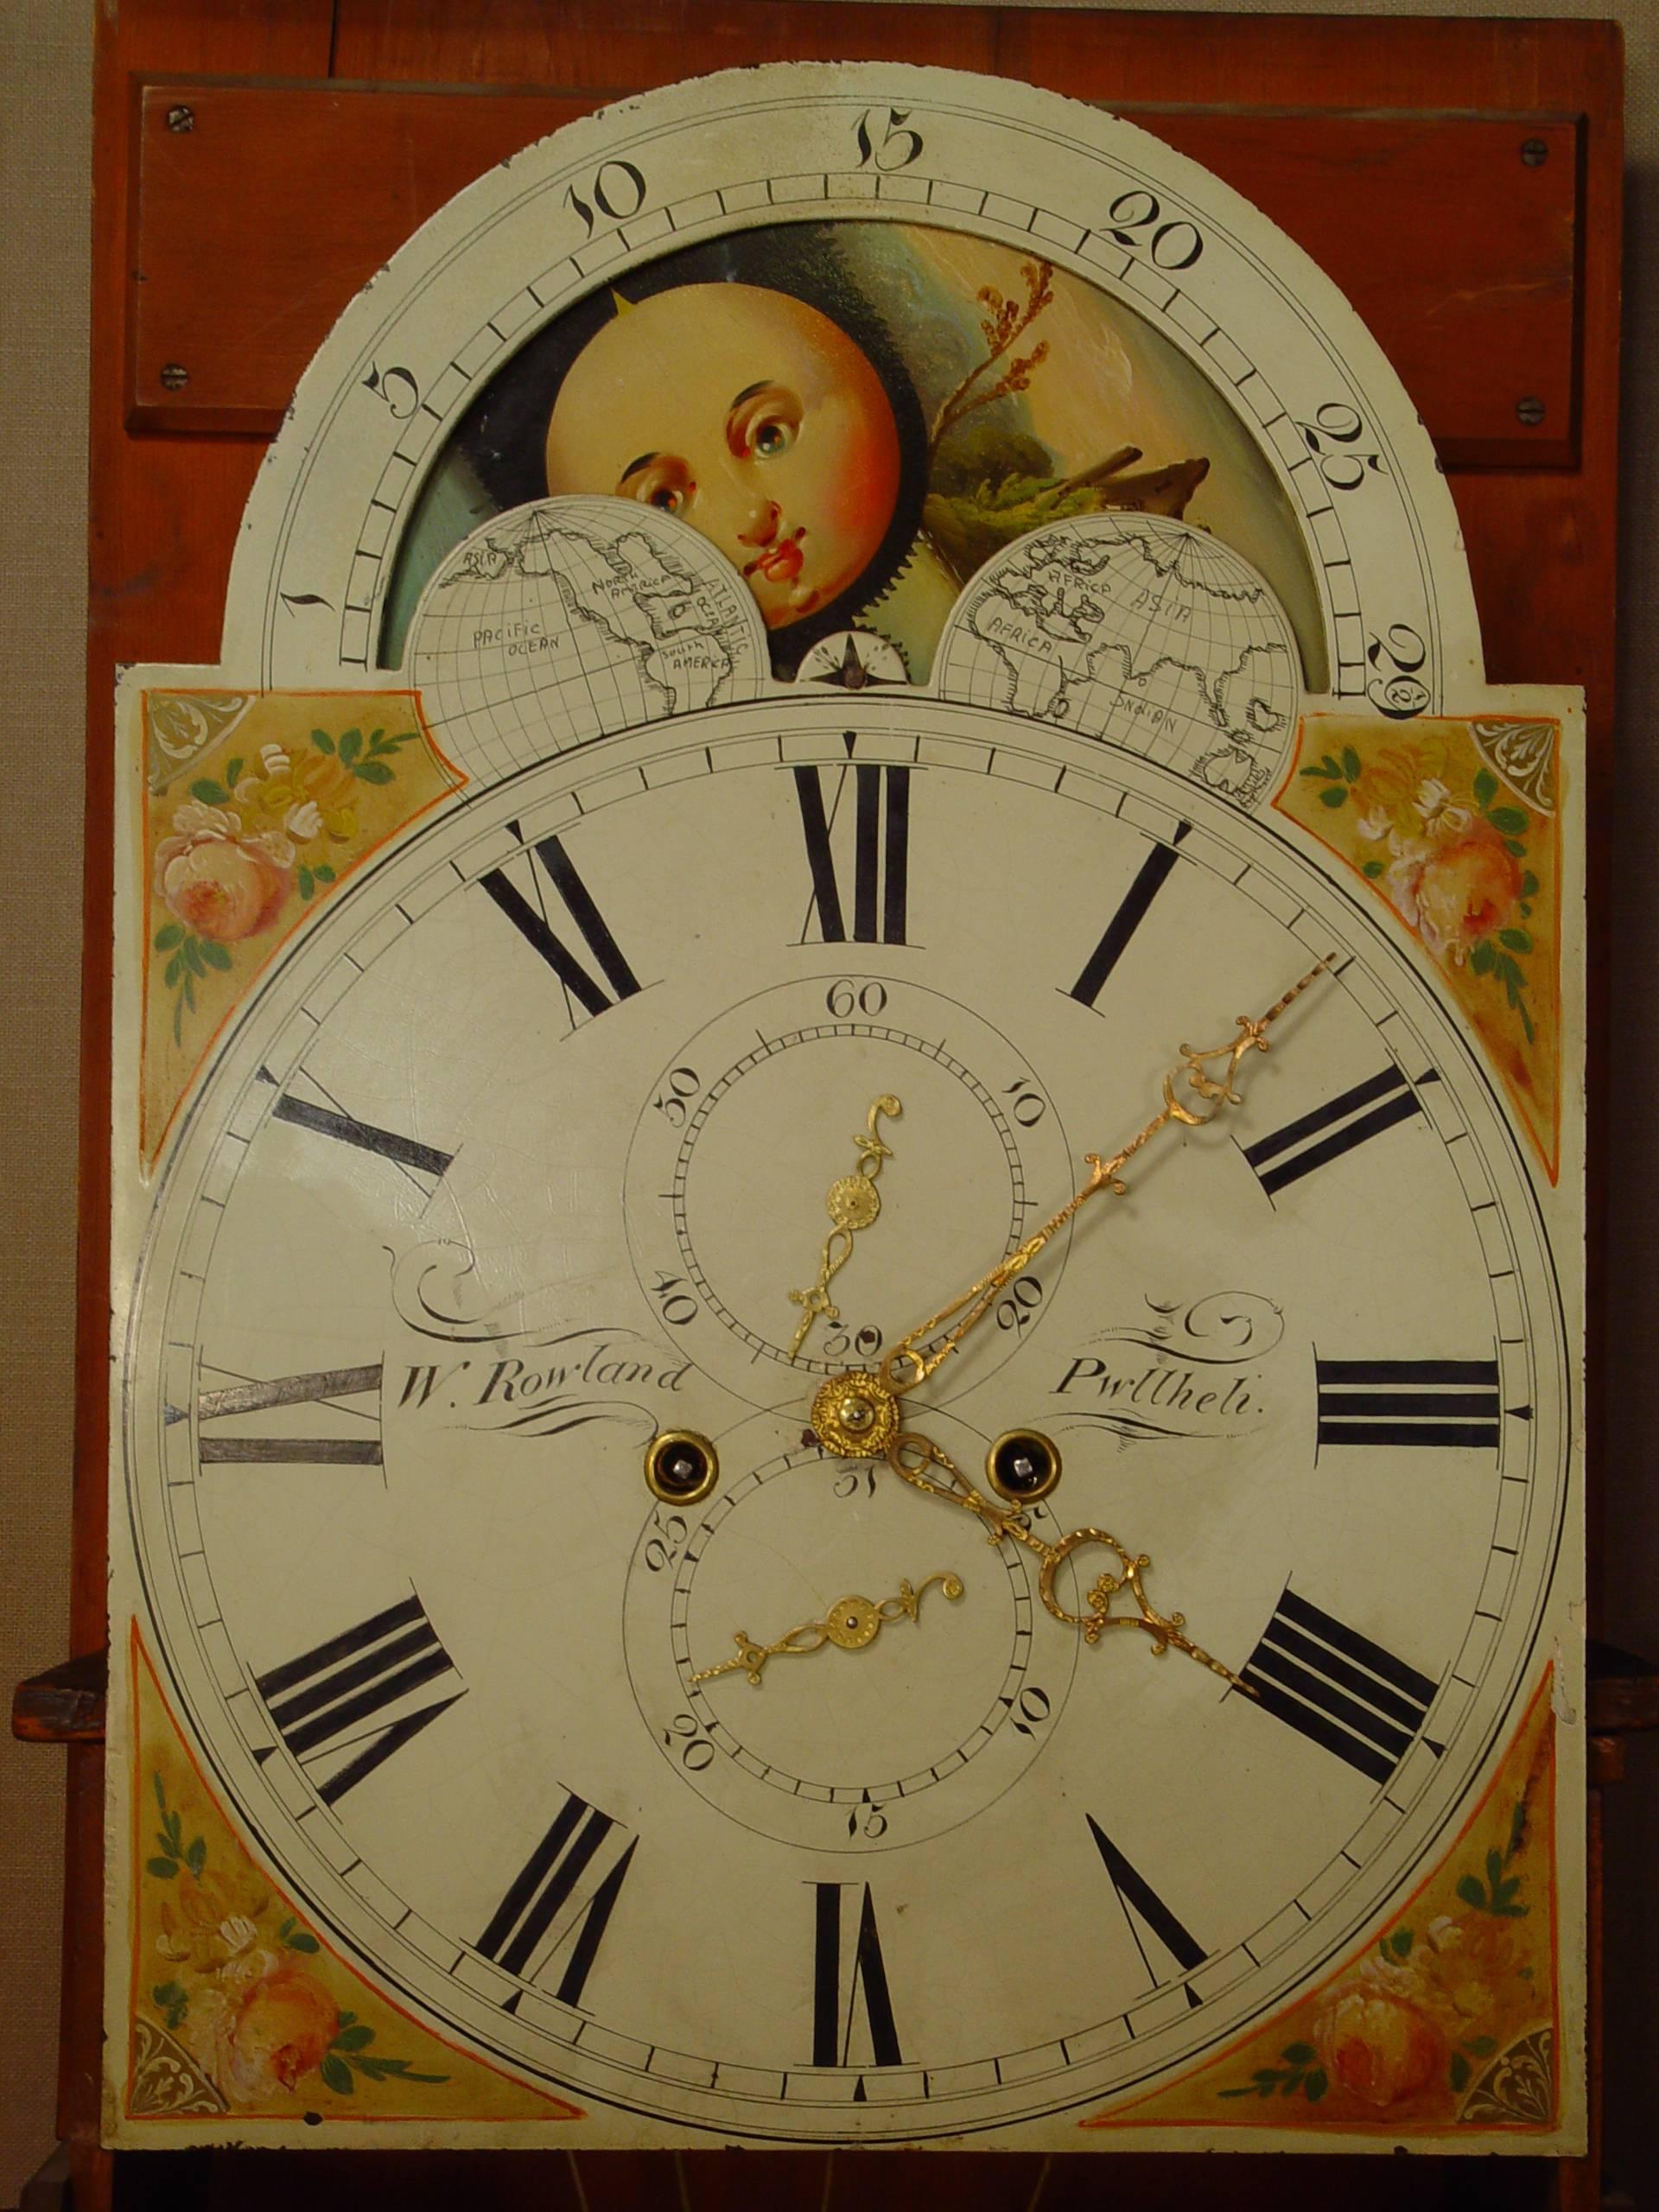 A Welsh mahogany longcase clock with moon phase W. Rowland Pwllheli, circa 1830.
Japanned dial with Roman numerals signed W. Rowland Pwllheli, matching engraved brass hands and subsidiaries for seconds and date, polychrome moon phase in the arch,